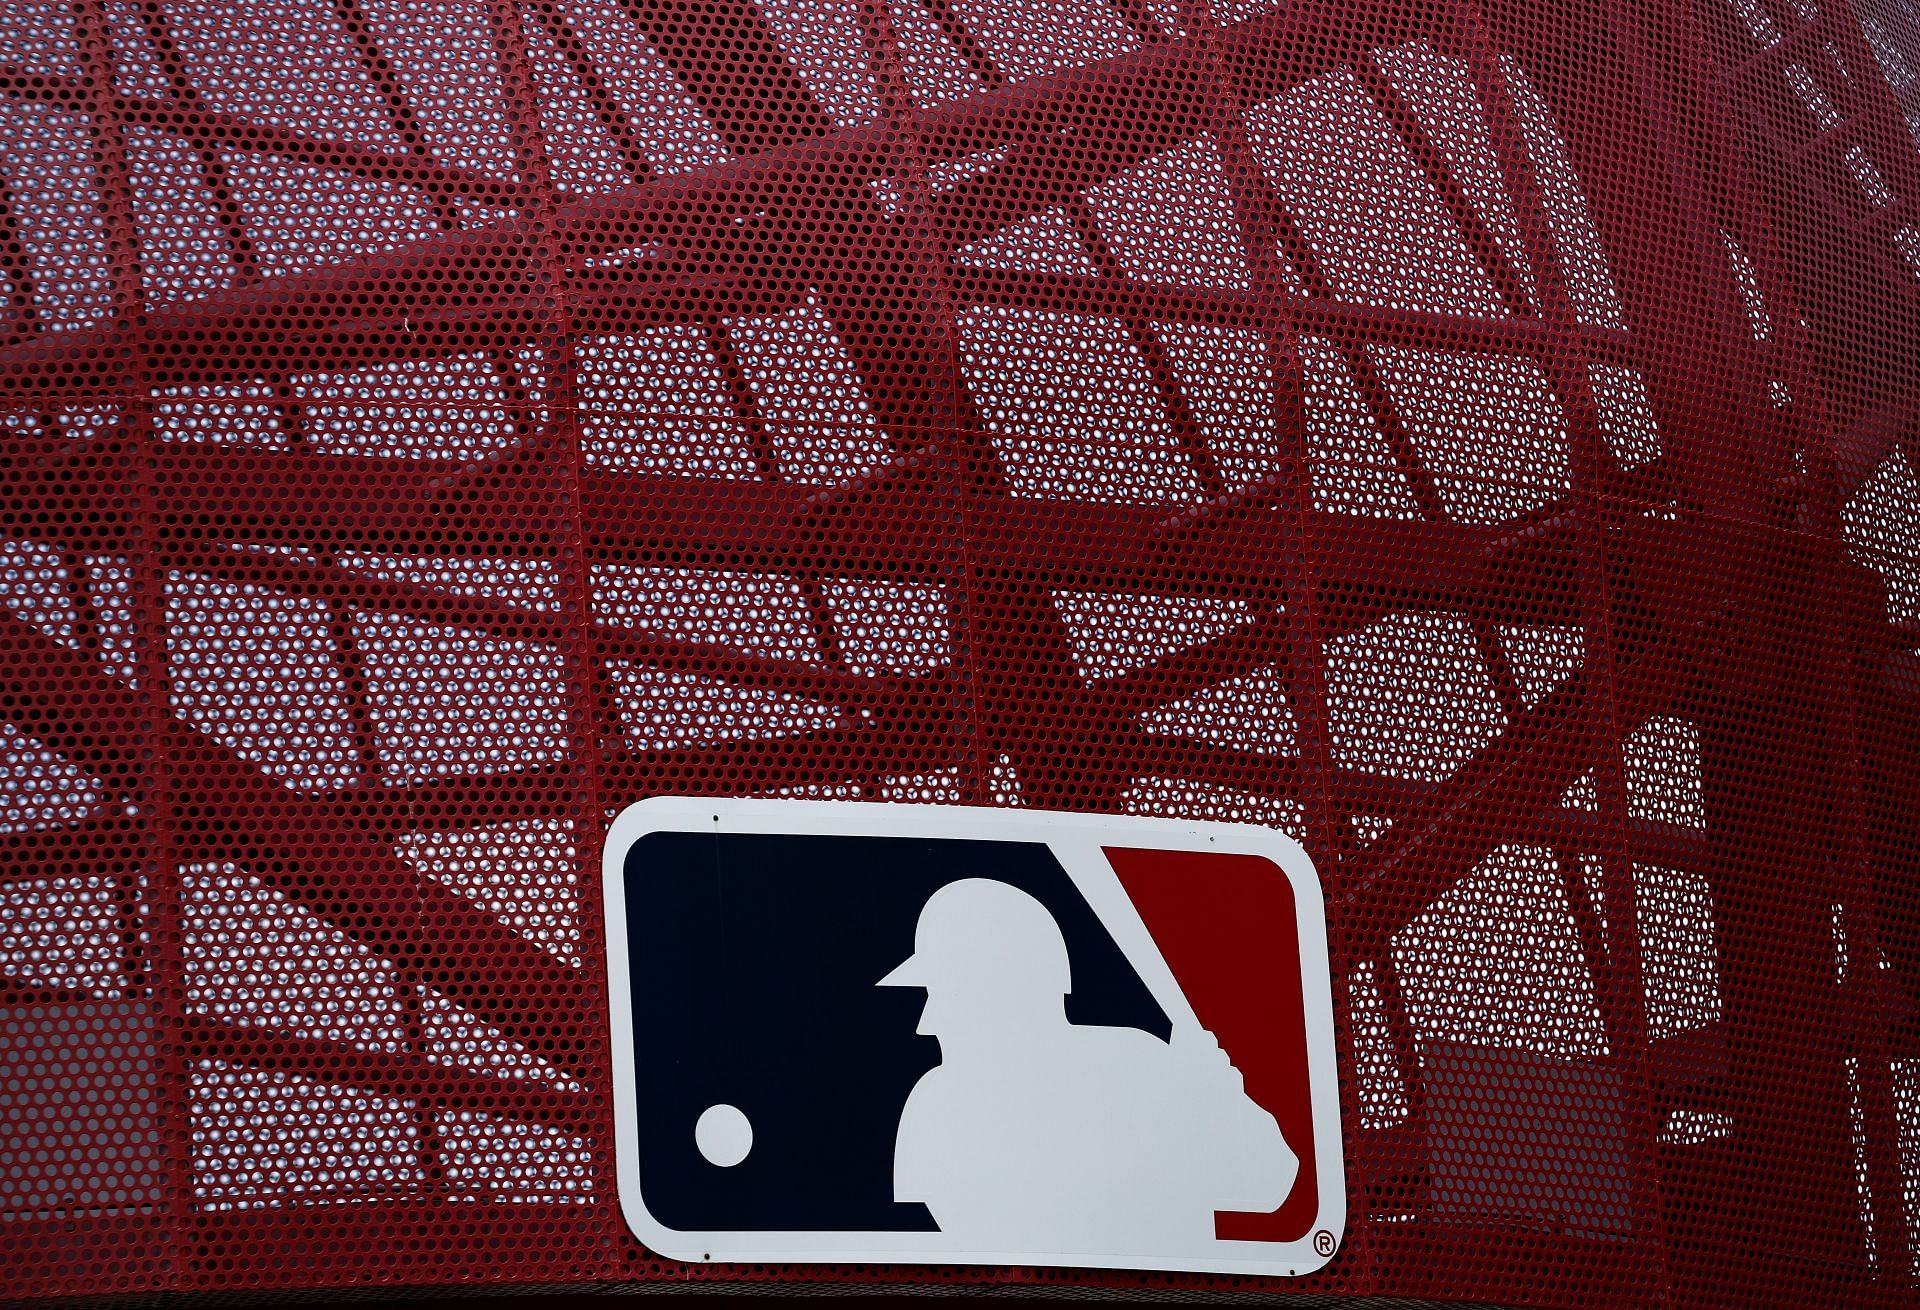 Major League Baseball logo at Angels Stadium in Anaheim, California ahead of Opening Day 2022 Oakland Athletics v Los Angeles Angels game.